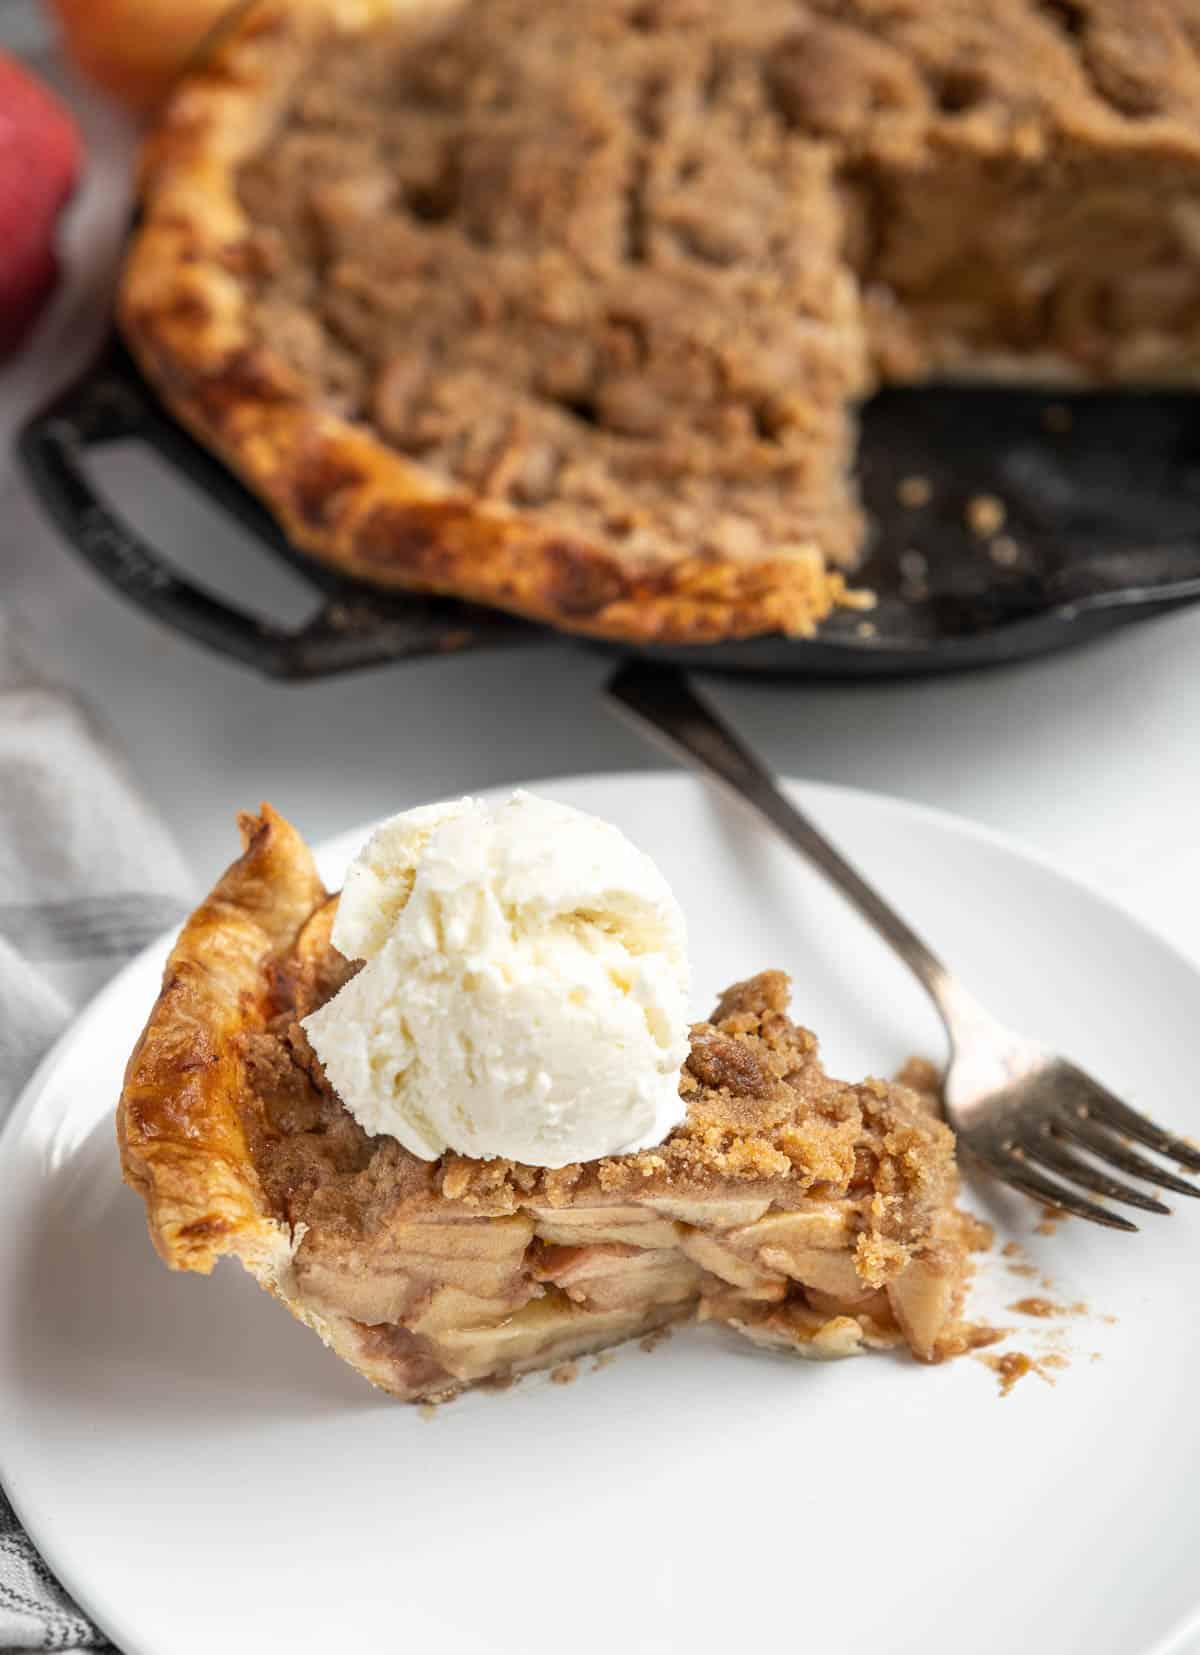 Slice of apple pie topped with ice cream with the pie in the background.